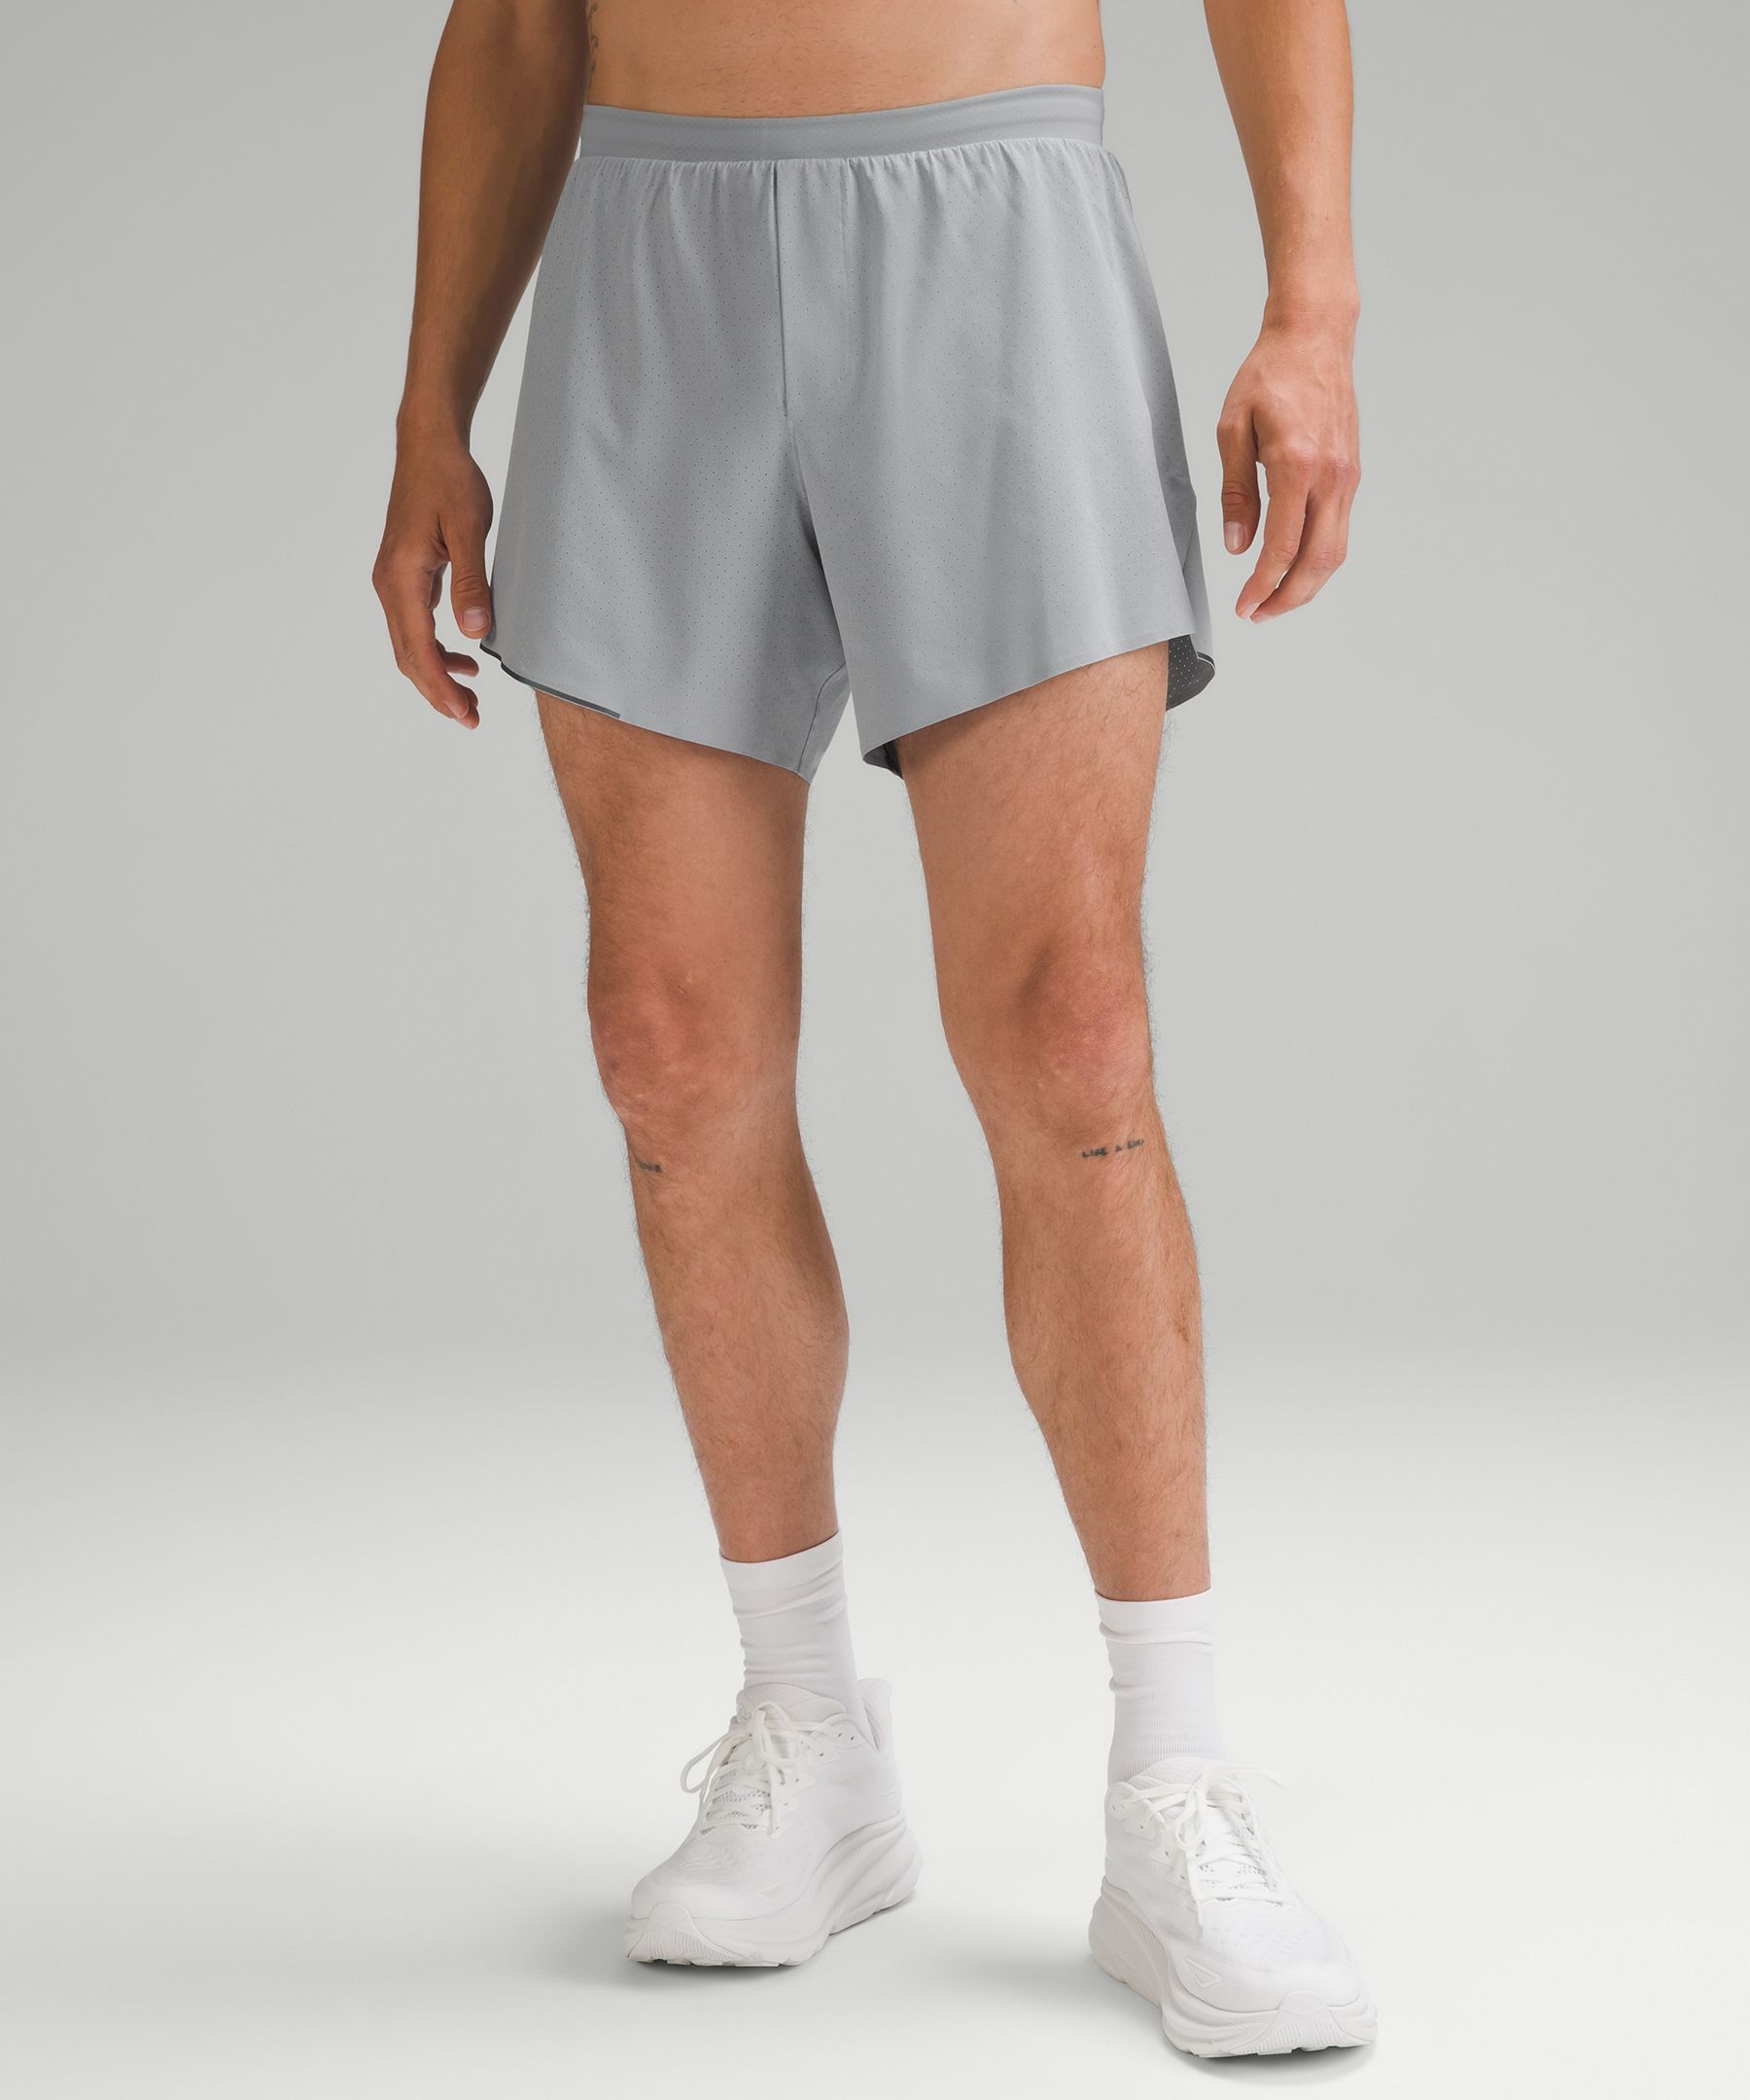 Lululemon Fast And Free Short *Non-Reflective - Sporadic Black Rhino Grey  Size 6 - $51 (25% Off Retail) - From A